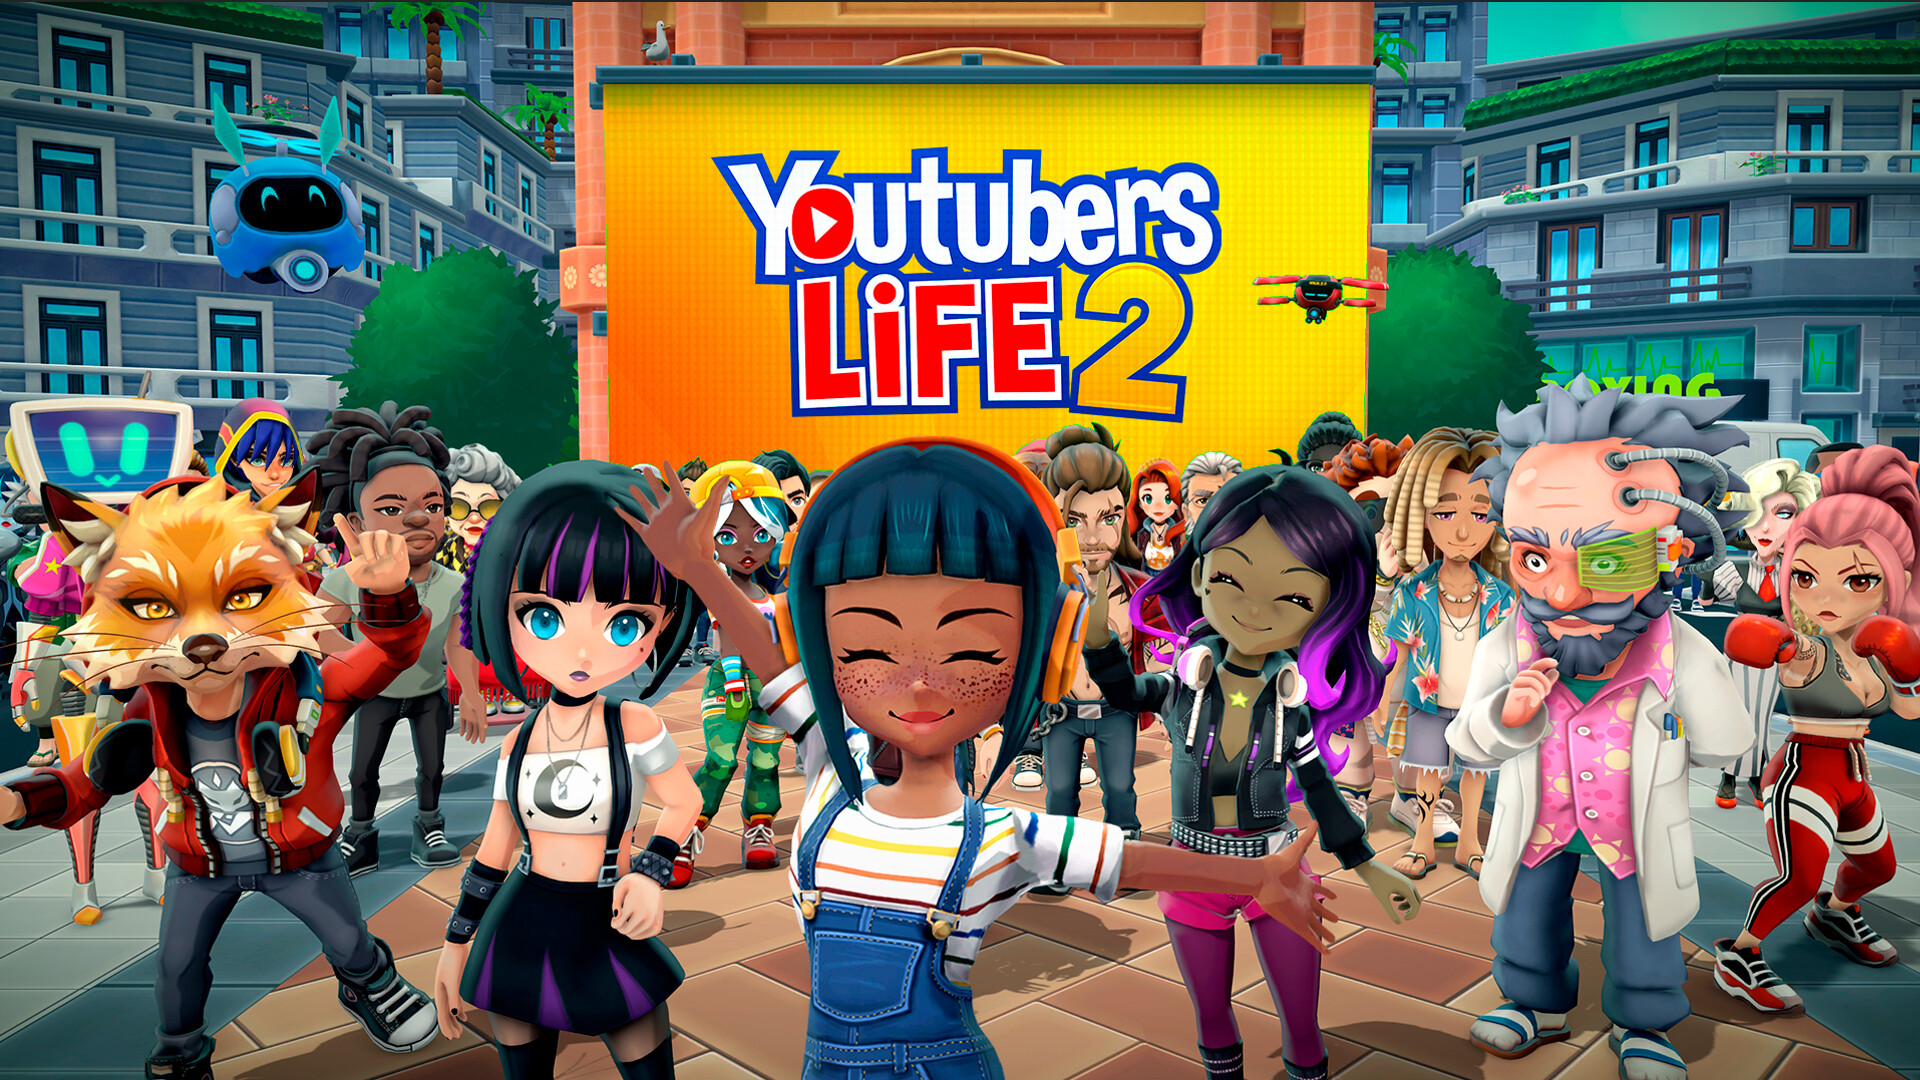 Youtubers Life 2 Free Download for PC